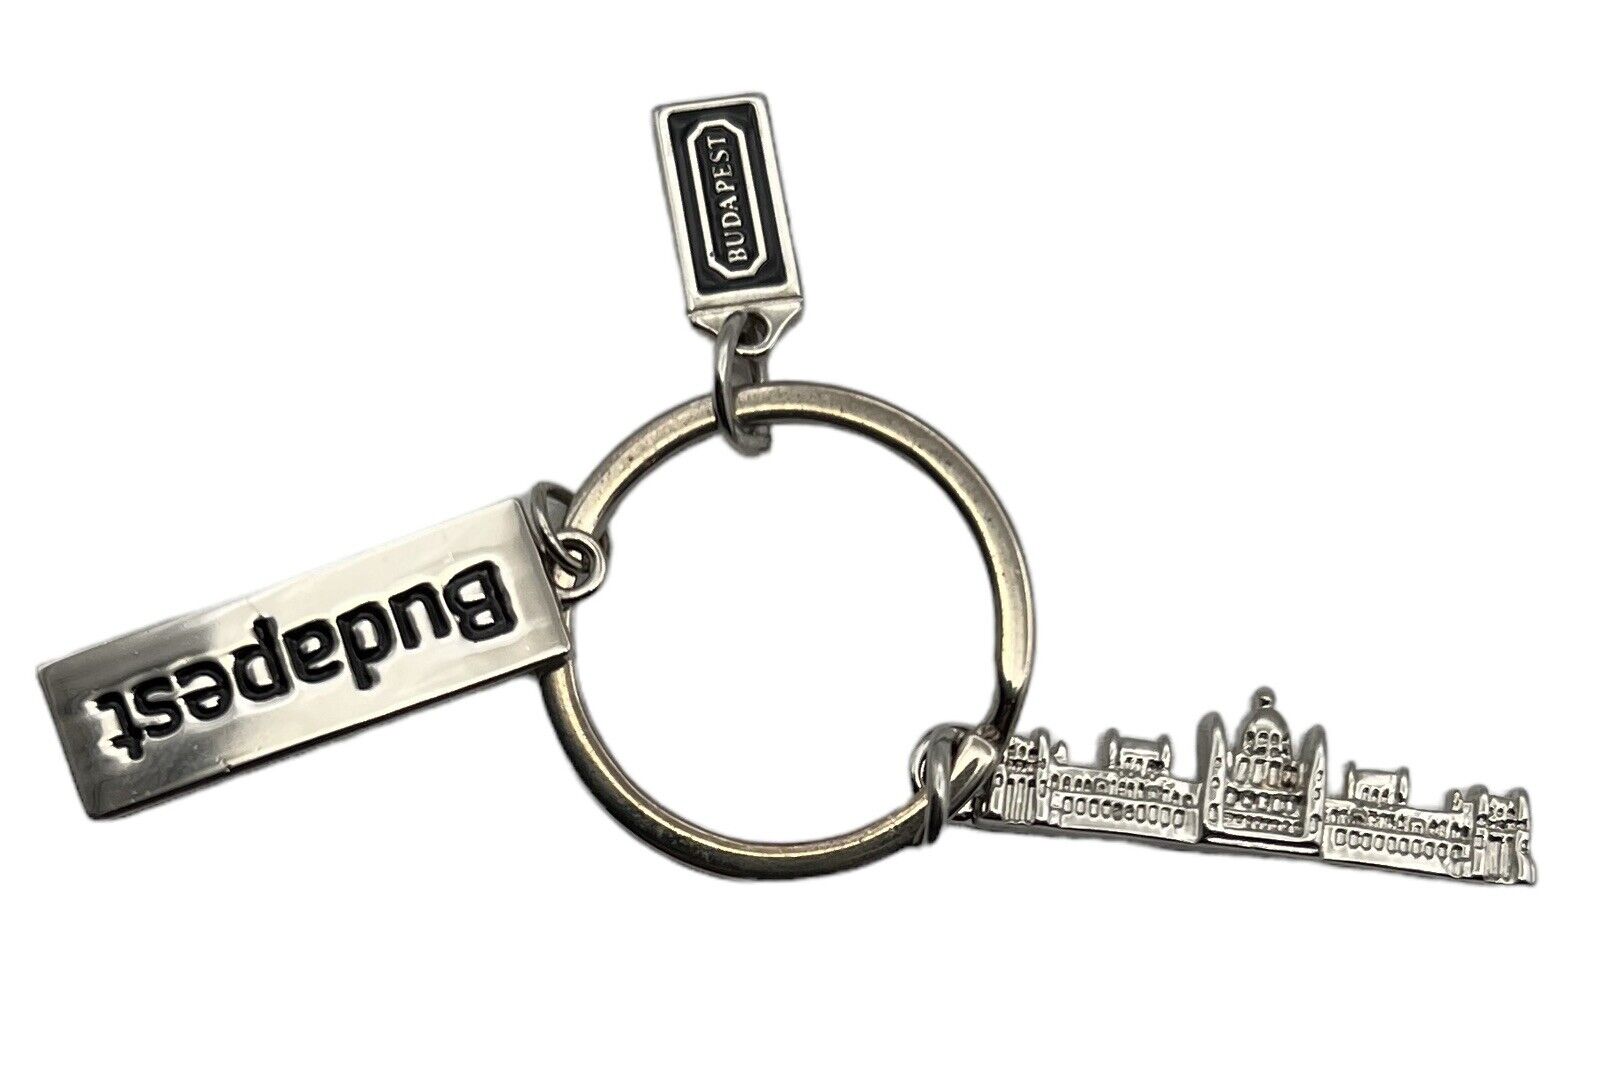 BUDAPEST Hungary Hungarian Parliament Building Figure Vintage KEYCHAIN w/ Charms